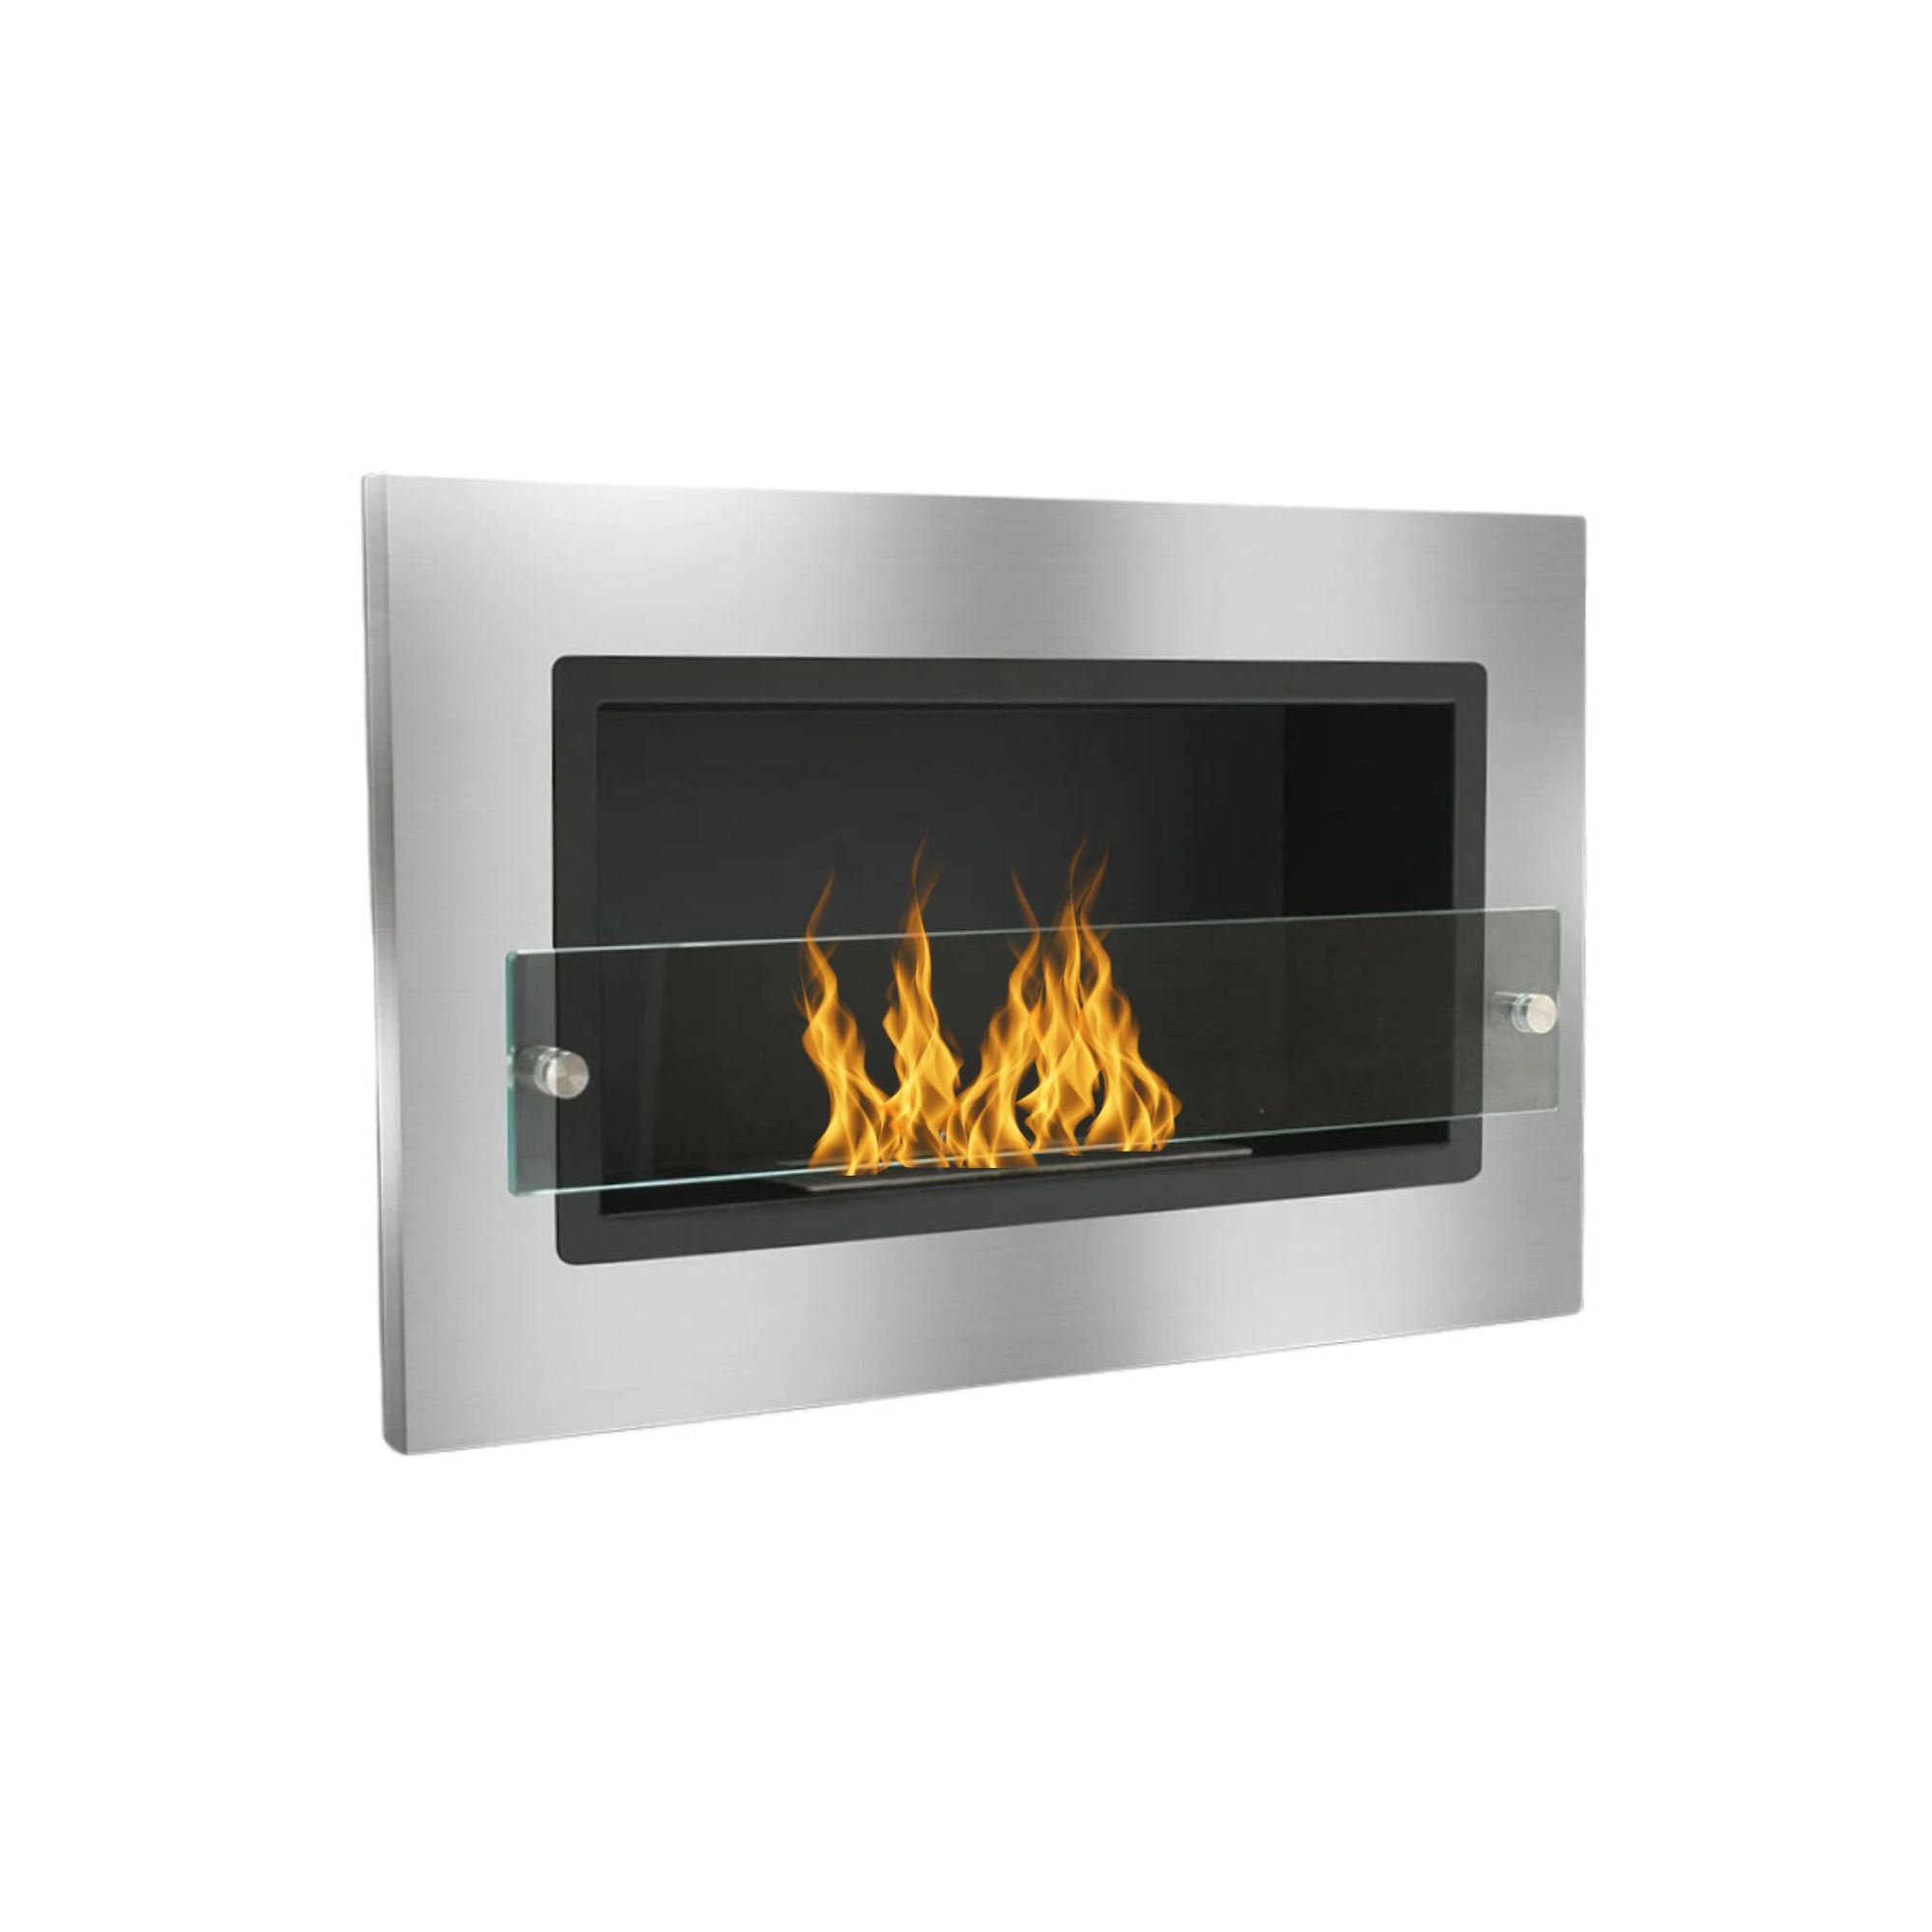 Bio Ethanol Built-in Fireplace - Wall Fireplace Stainless Steel With Glass 64 cm 